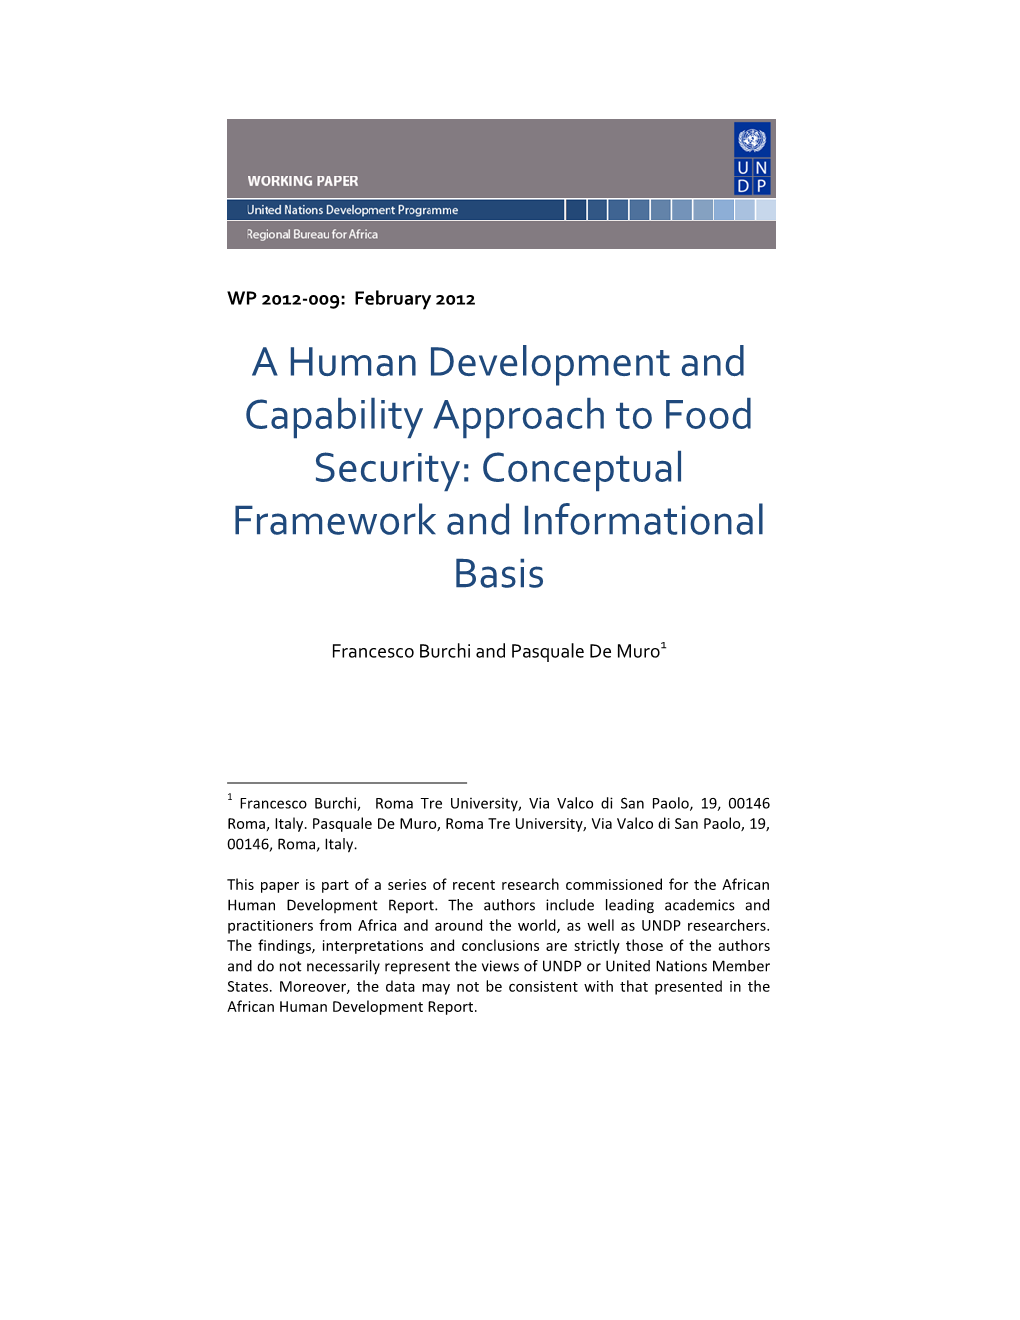 A Human Development and Capability Approach to Food Security: Conceptual Framework and Informational Basis